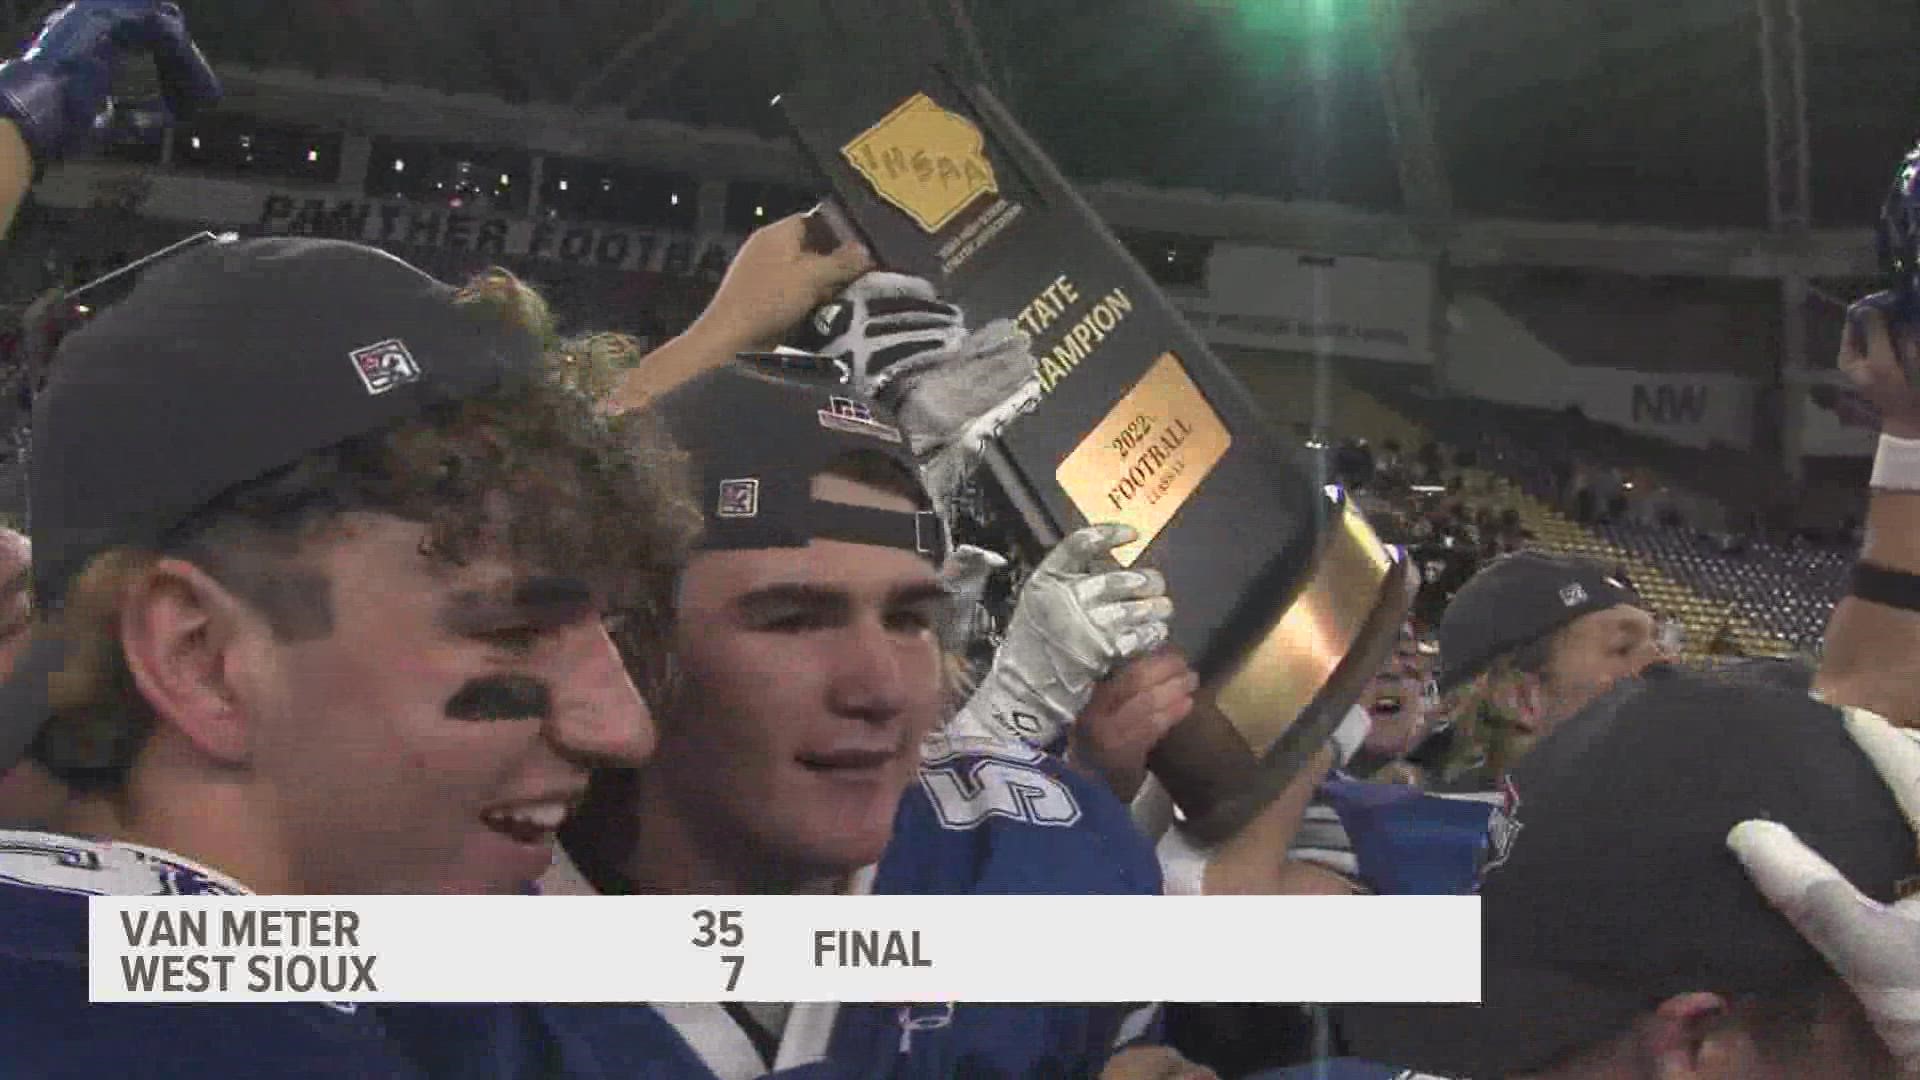 Van Meter cruised to its third state title in six years, defeating West Sioux in a rematch of last year's Class 1A state championship game.